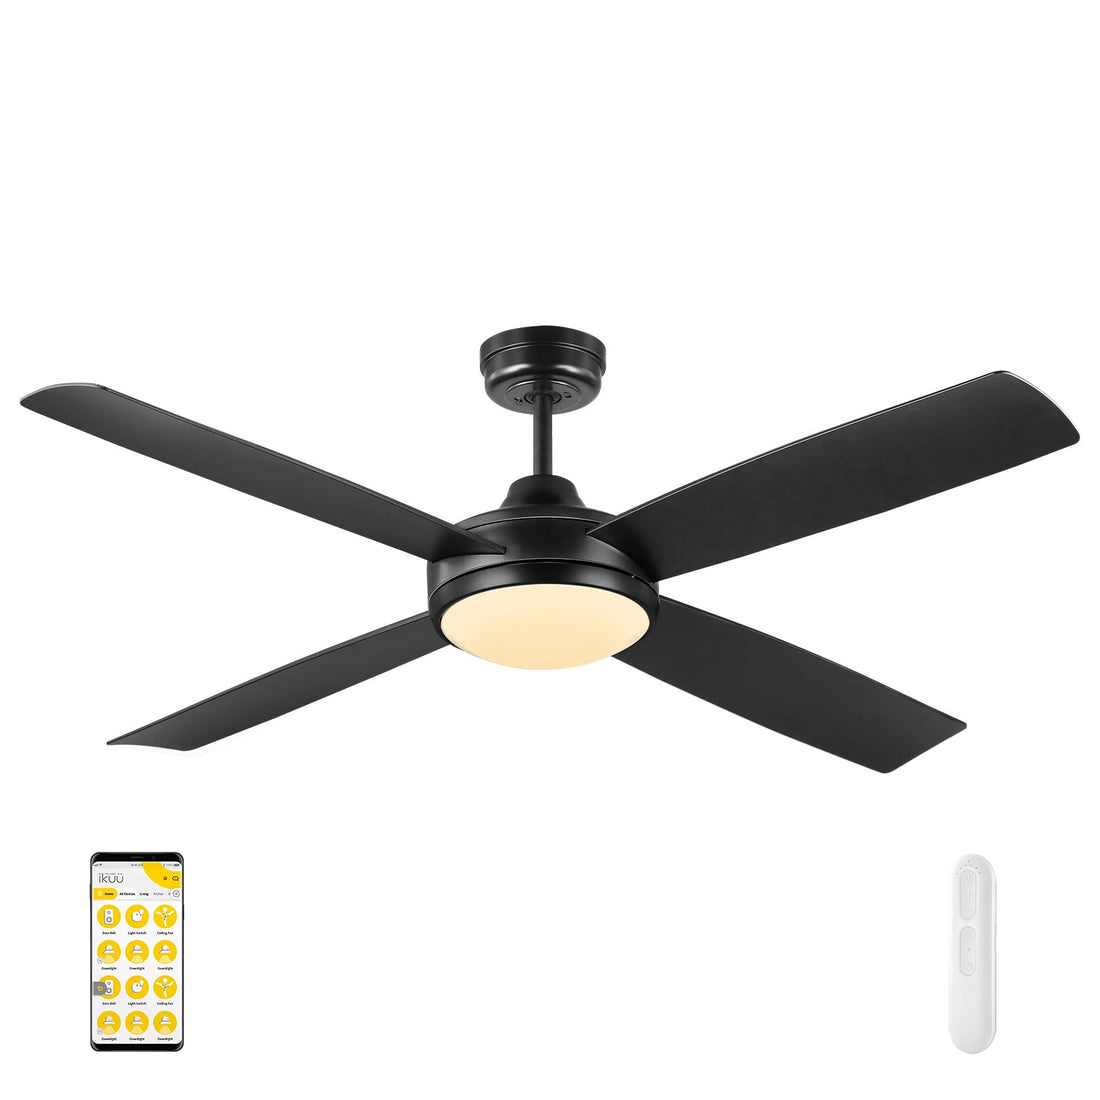 Anova DC Ikuü Smart Wi-Fi Ceiling Fan with LED Light and Remote Mercator